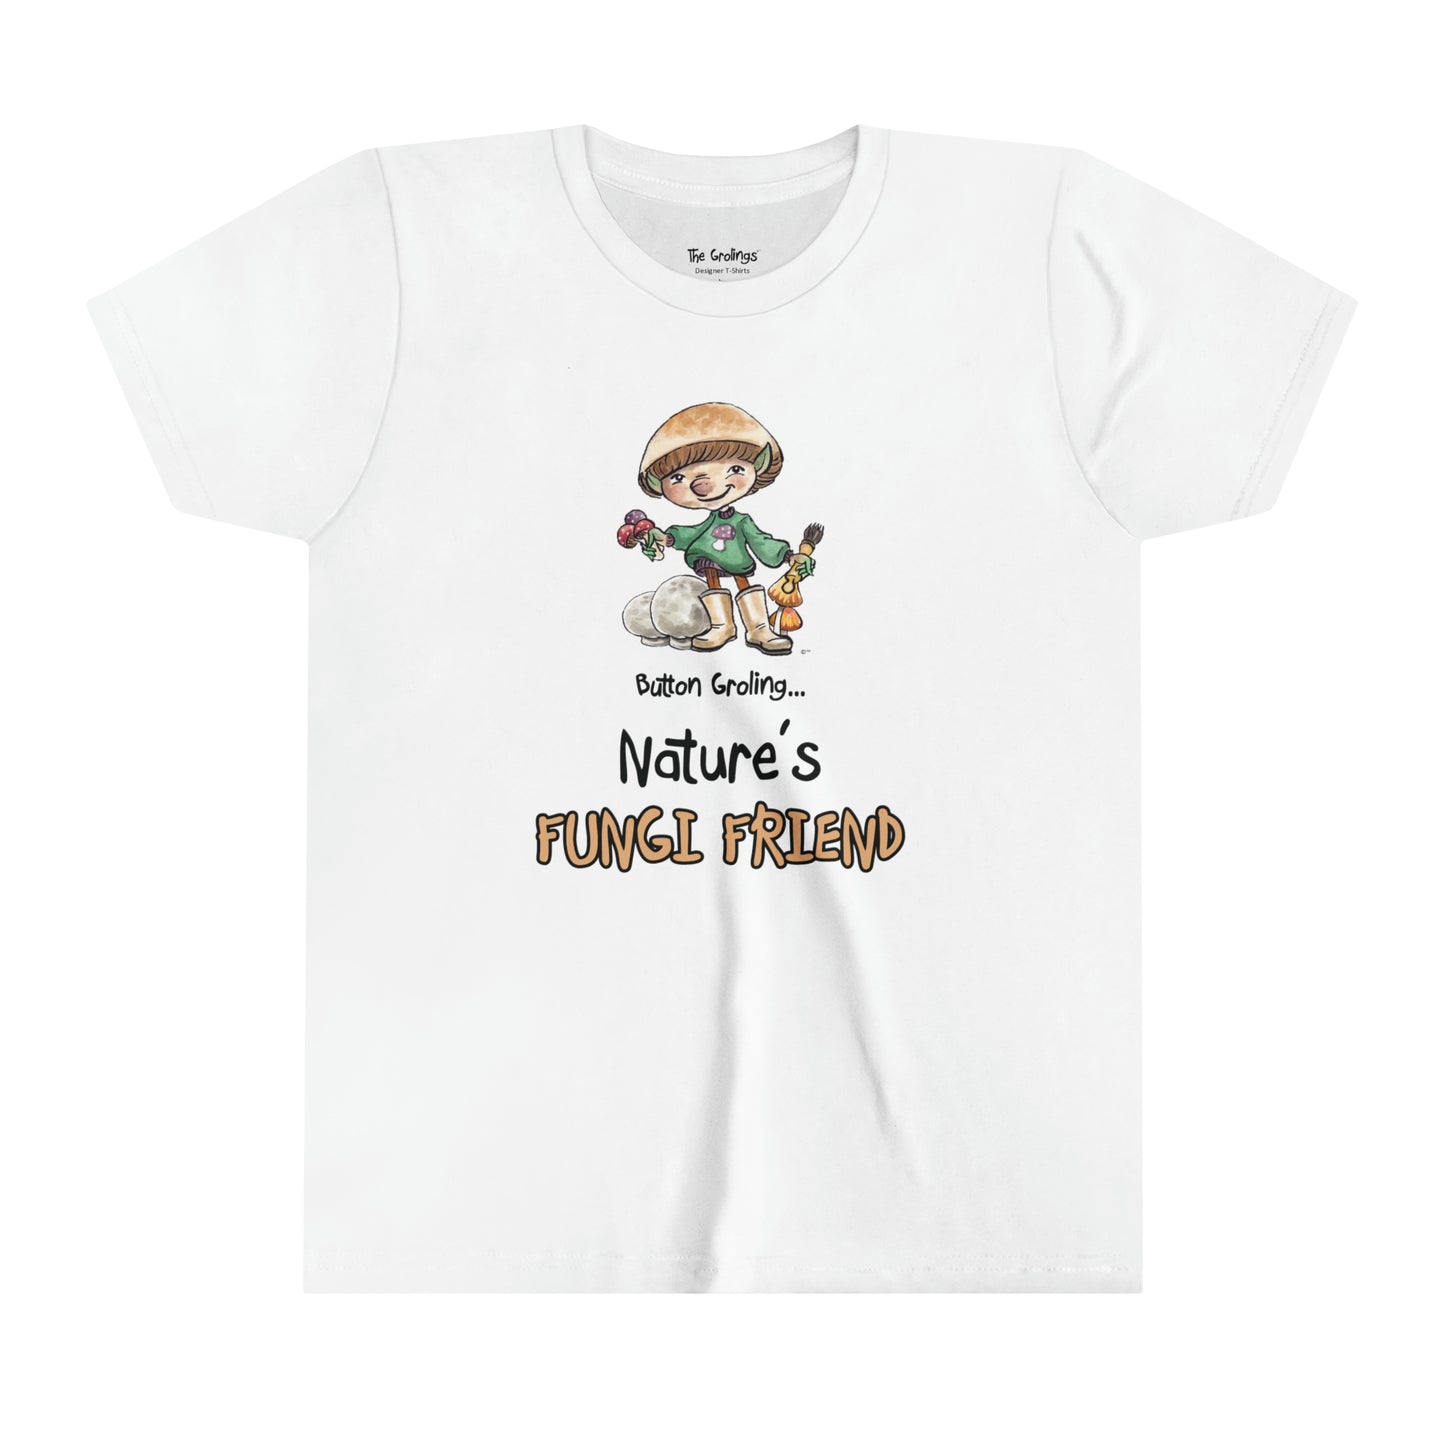 A white official USA Grolings kids' t-shirt, featuring the phrase 'Button Groling... Nature’s Fungi Friend.' The t-shirt showcases Button Groling, holding a little group of toadstools in one hand and a mushroom brush in the other. Beside Button Groling, there are two large puffball mushrooms, symbolising the importance of fungi in the forest ecosystem.